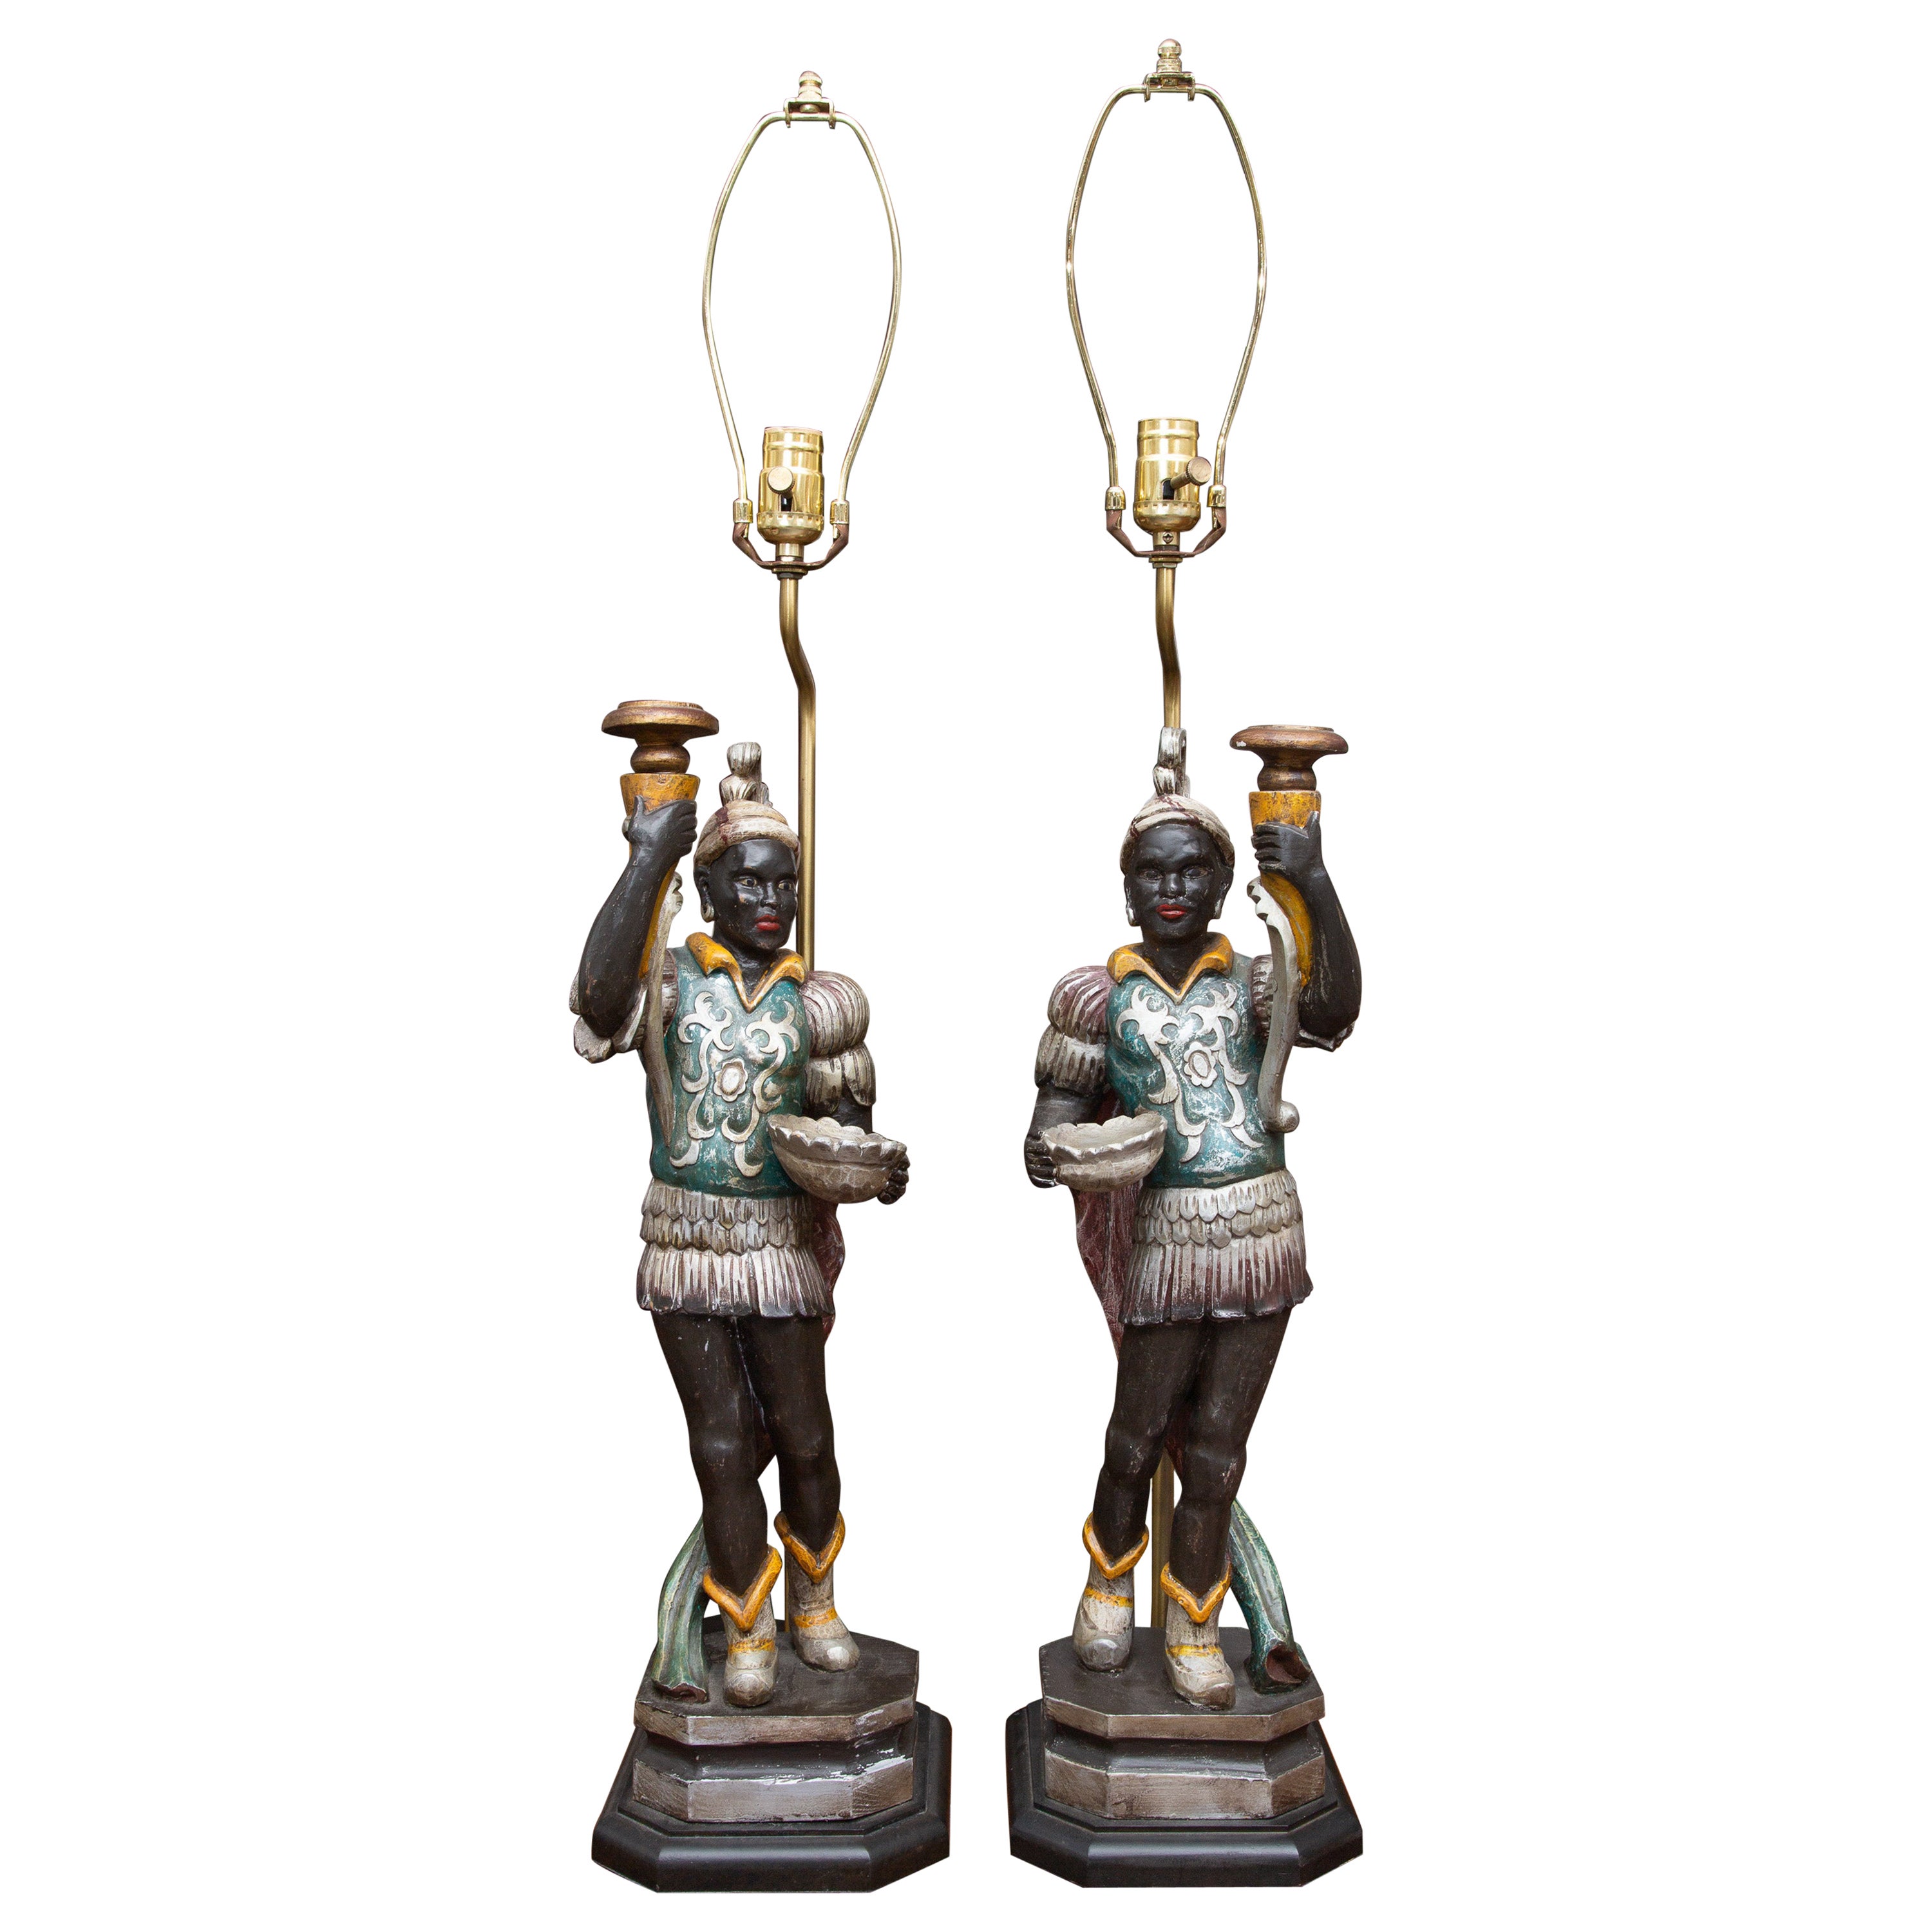 Pair of Vintage Italian Polychromed Figural Table Lamps